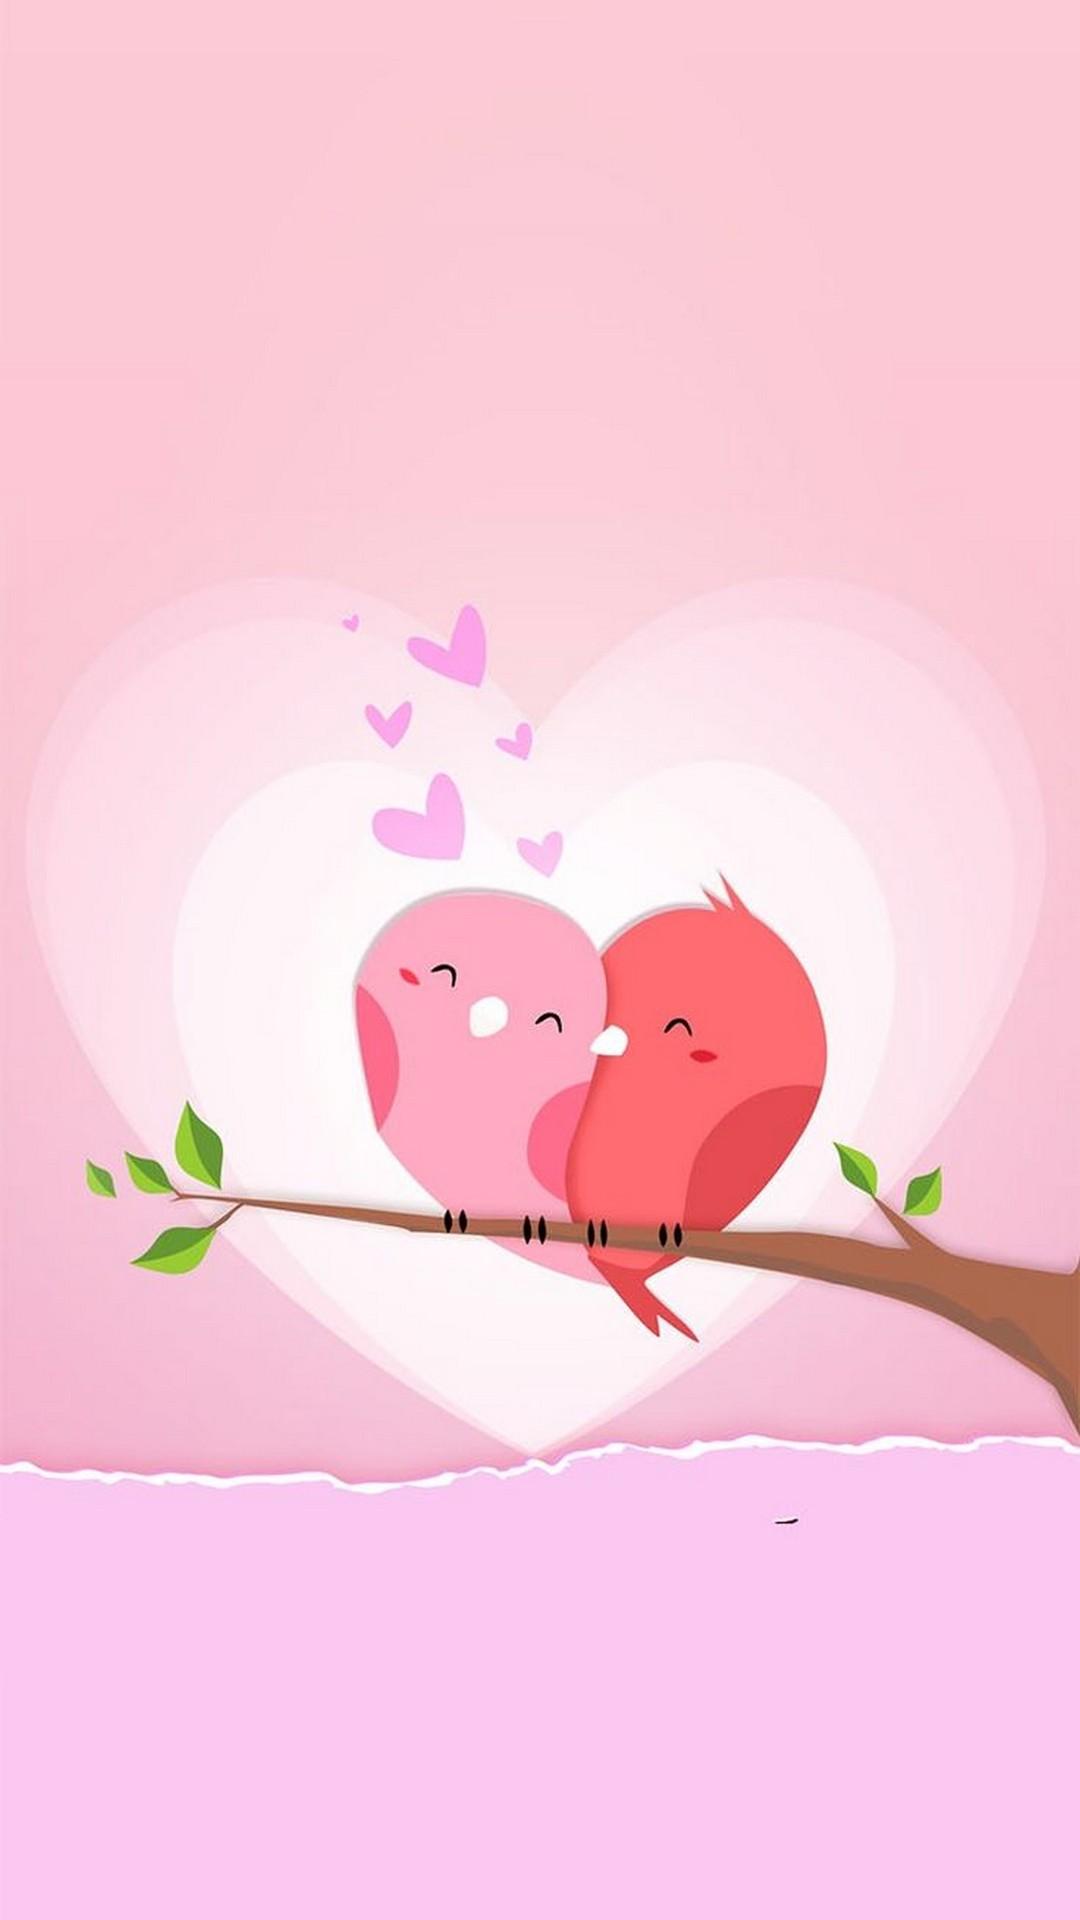 Romantic Image Of Valentines Day iPhone Wallpaper 3D